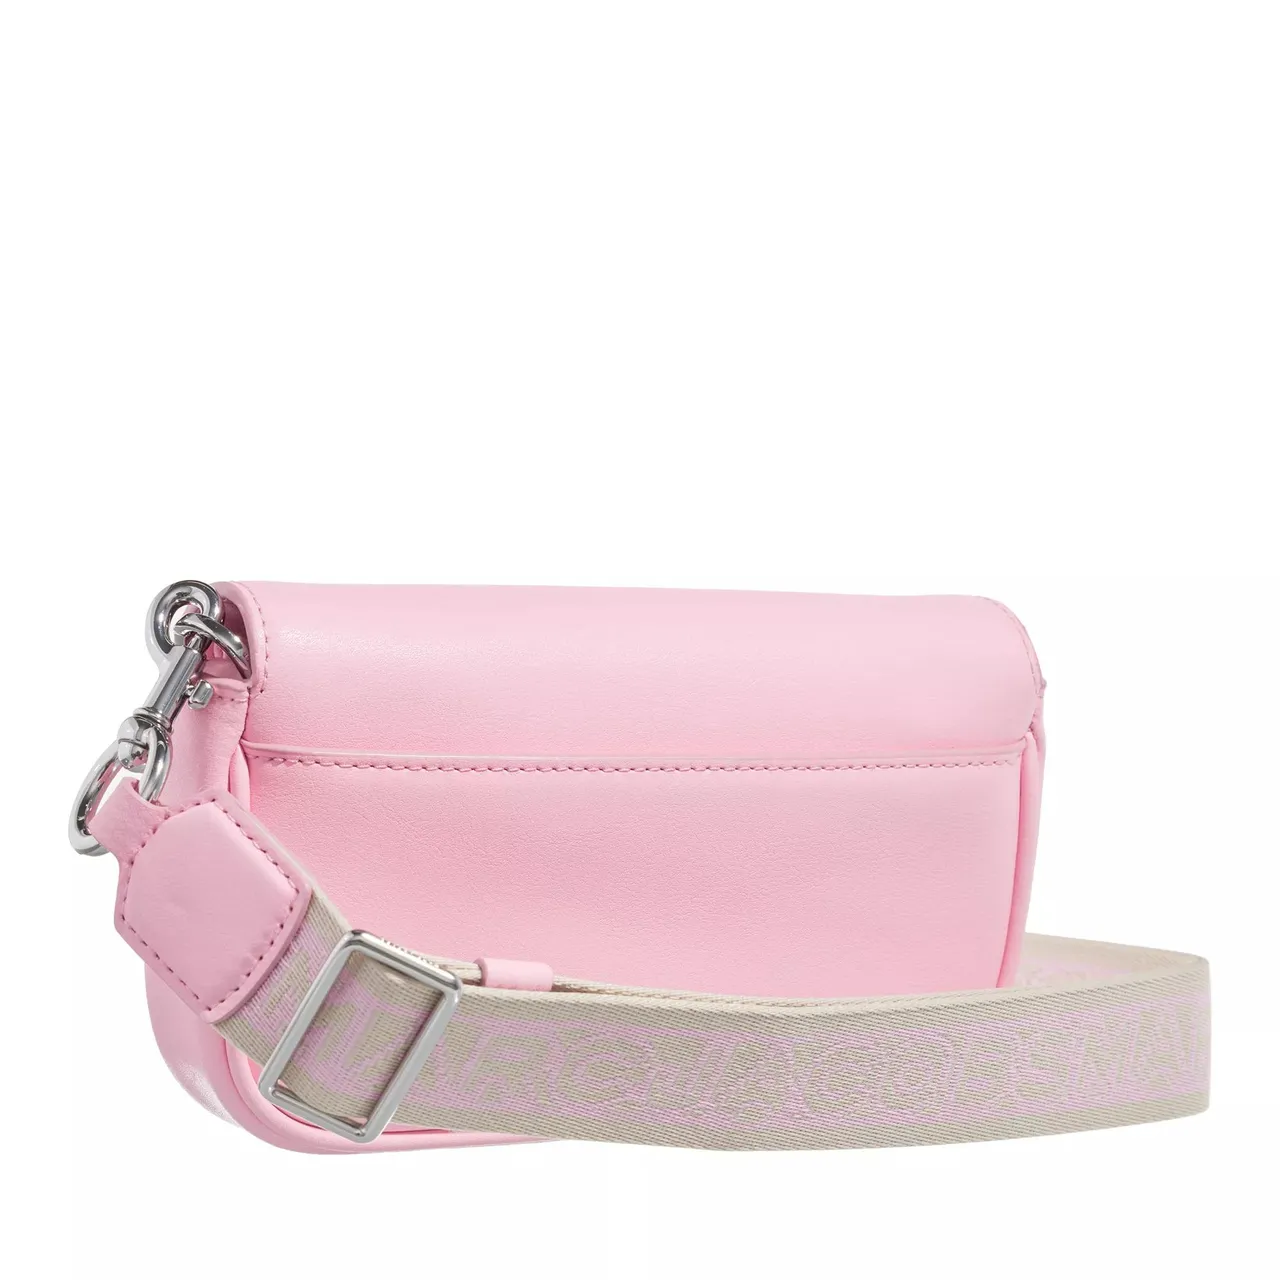 Marc Jacobs Crossbody Bags - Small Shoulder Bag - pink - Crossbody Bags for ladies